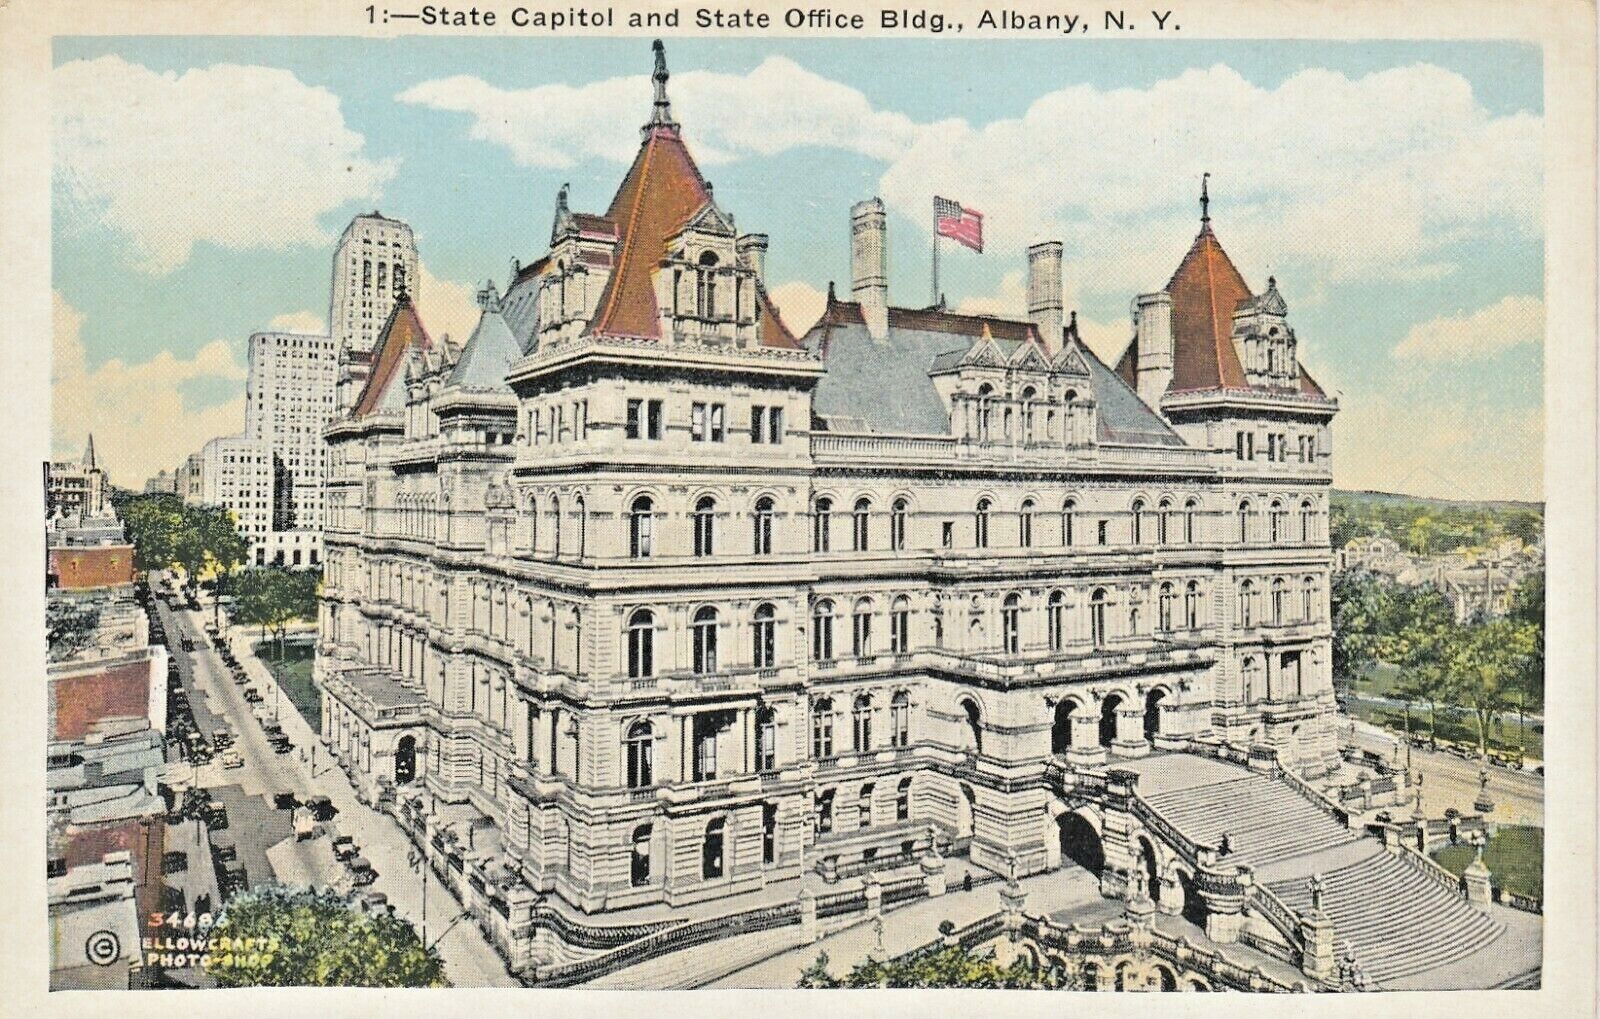 Vintage Postcard ALBANY, NY  STATE CAPITOL & STATE OFFICE BLDG   UNPOSTED